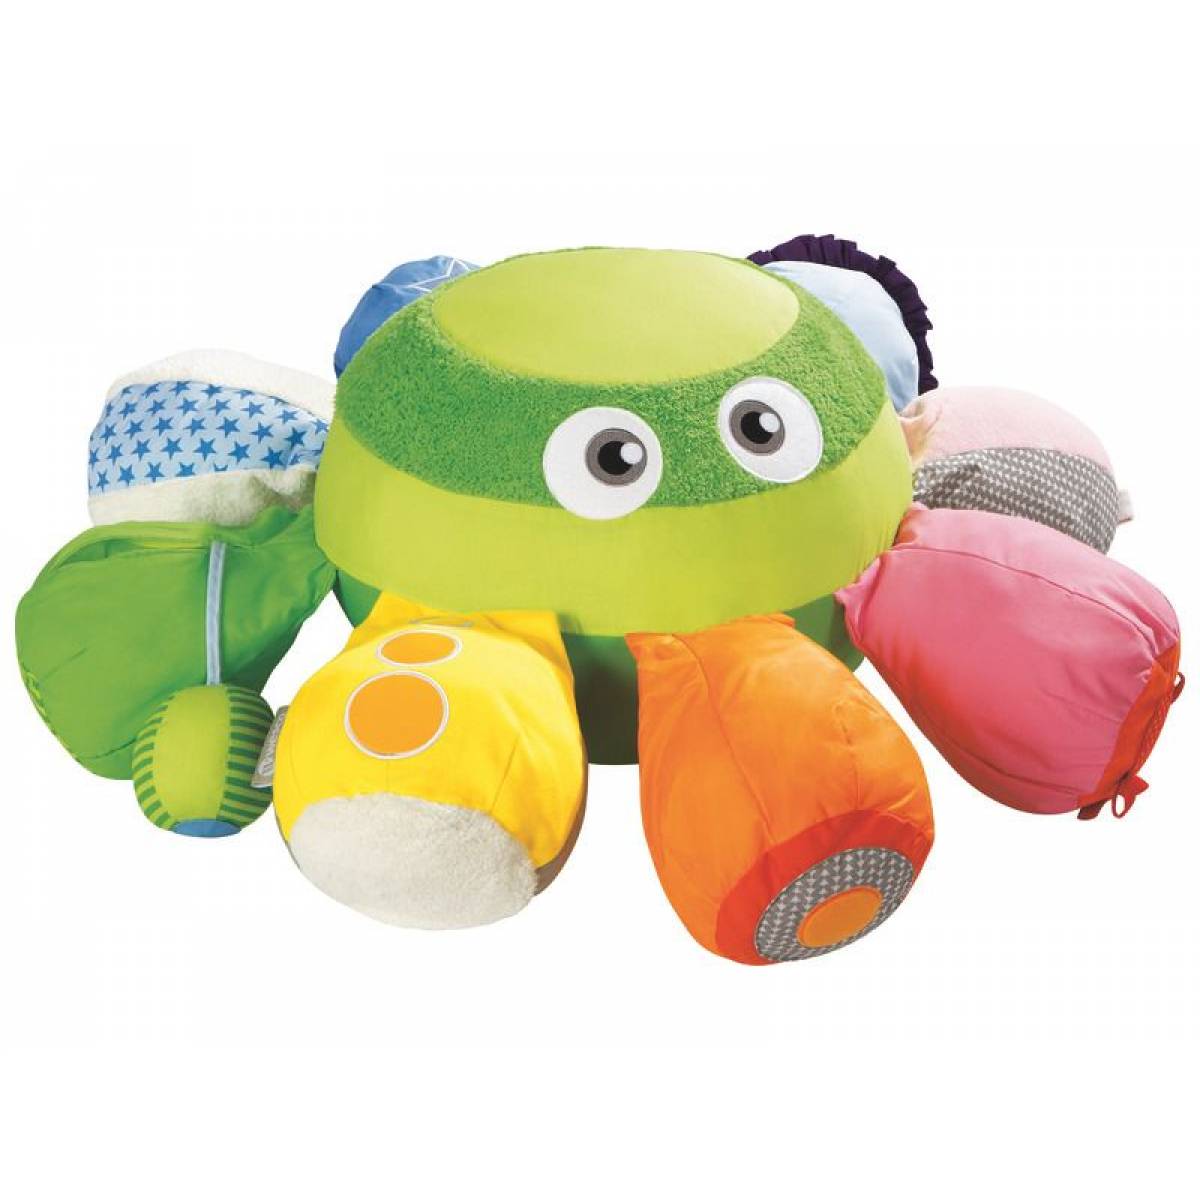 Activity Soft Toy - Actinimos Octopus